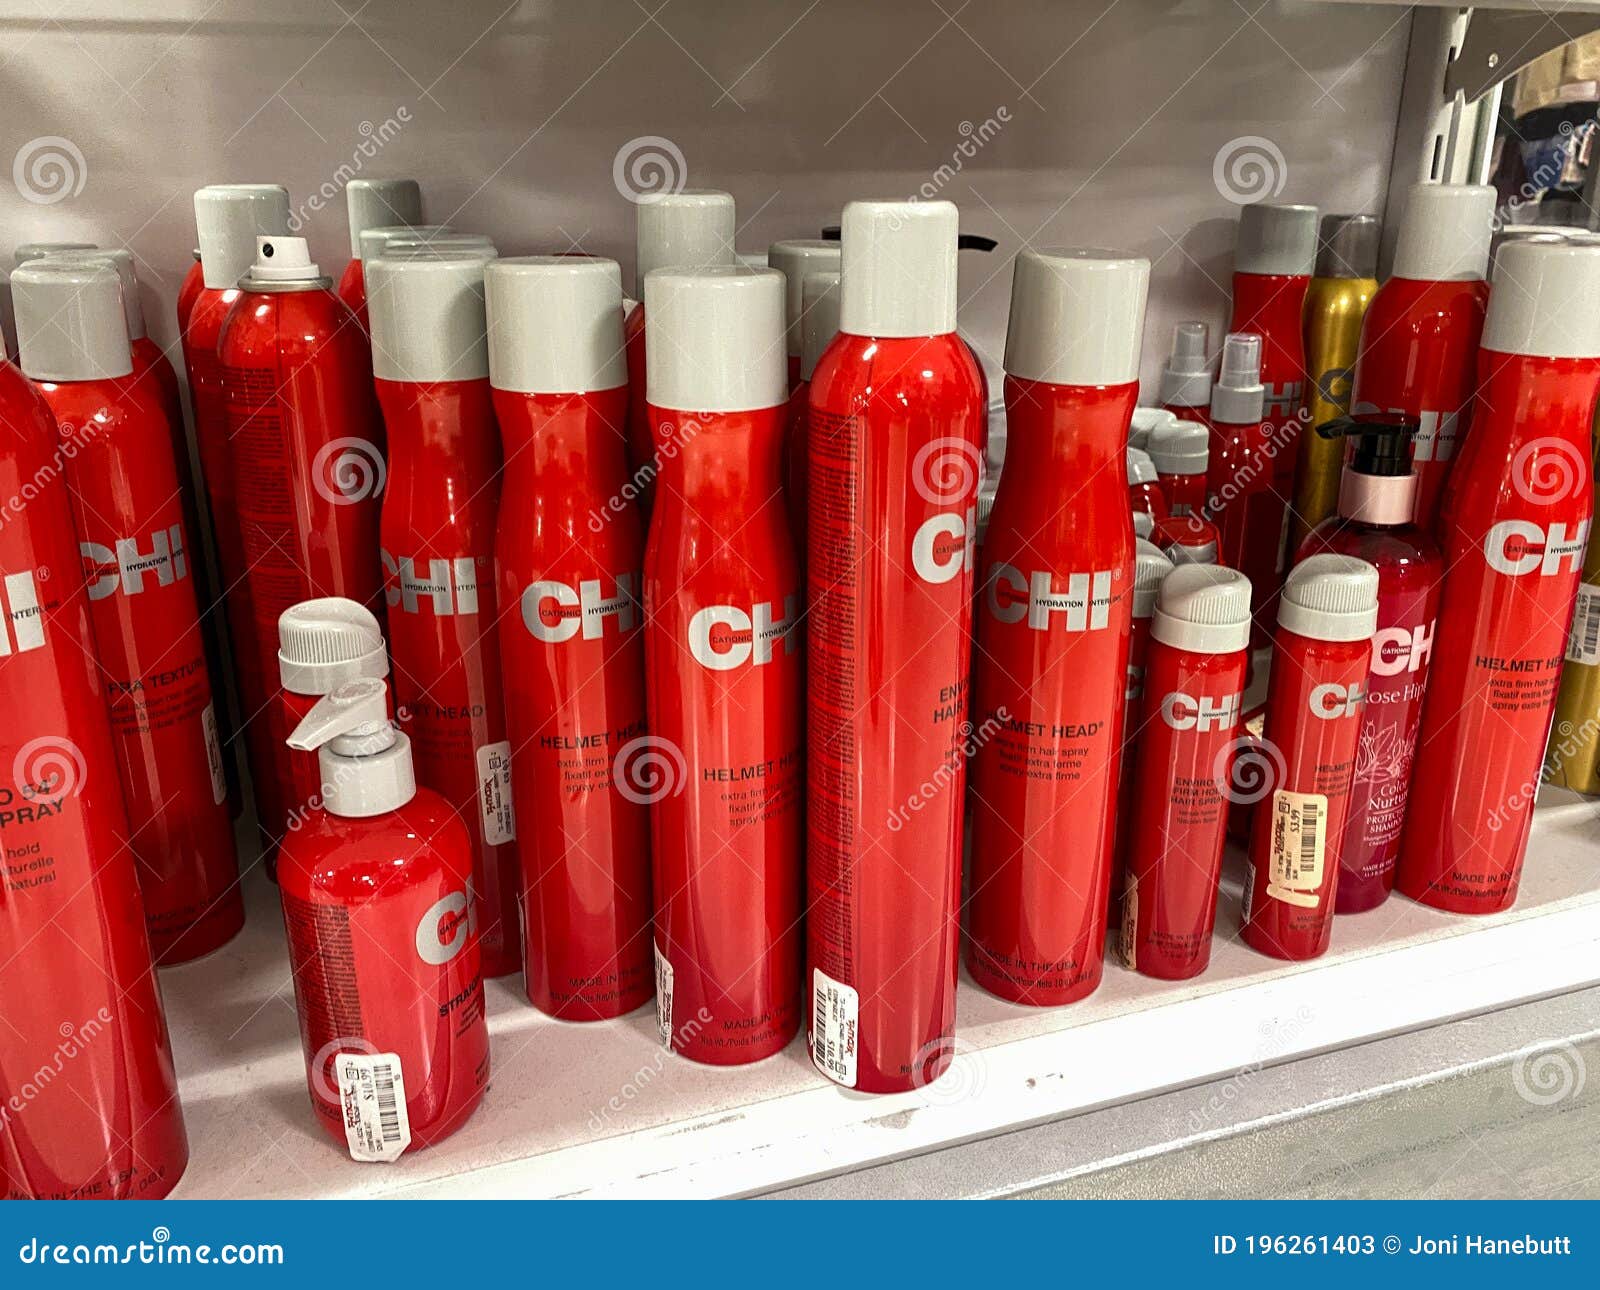 A Display of Chi Hair Styling Products at a TJ Maxx Store in Orlando,  Florida Editorial Stock Photo - Image of cosmetic, hairspray: 196261403